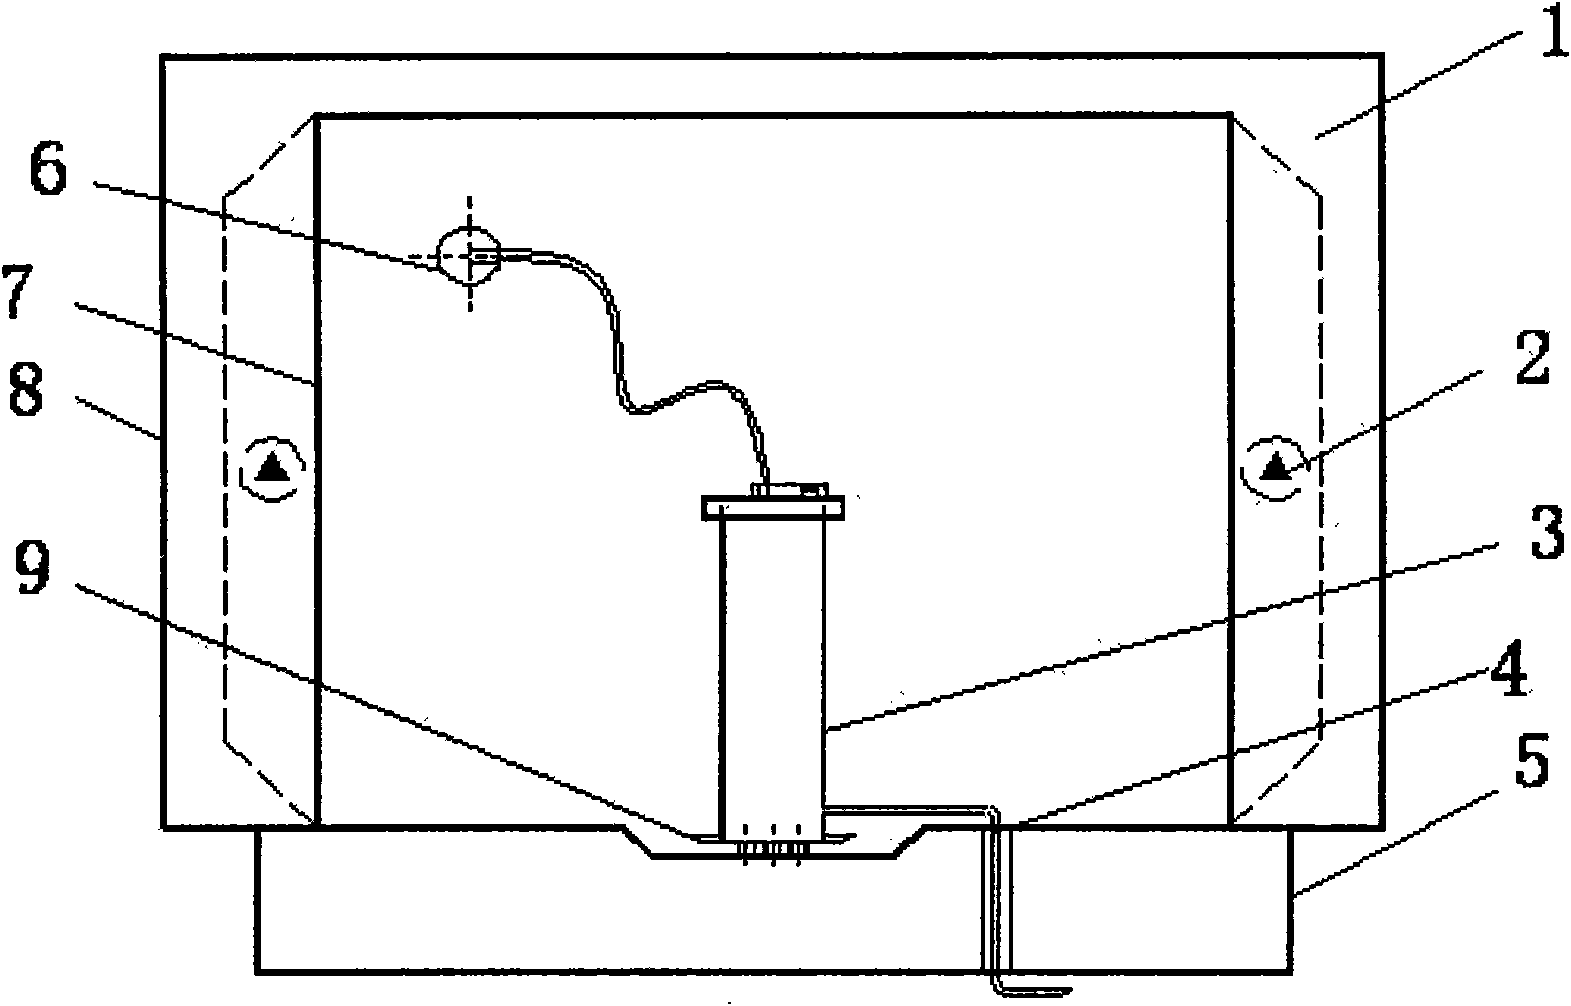 On-line ultraviolet microwave combined digestion system